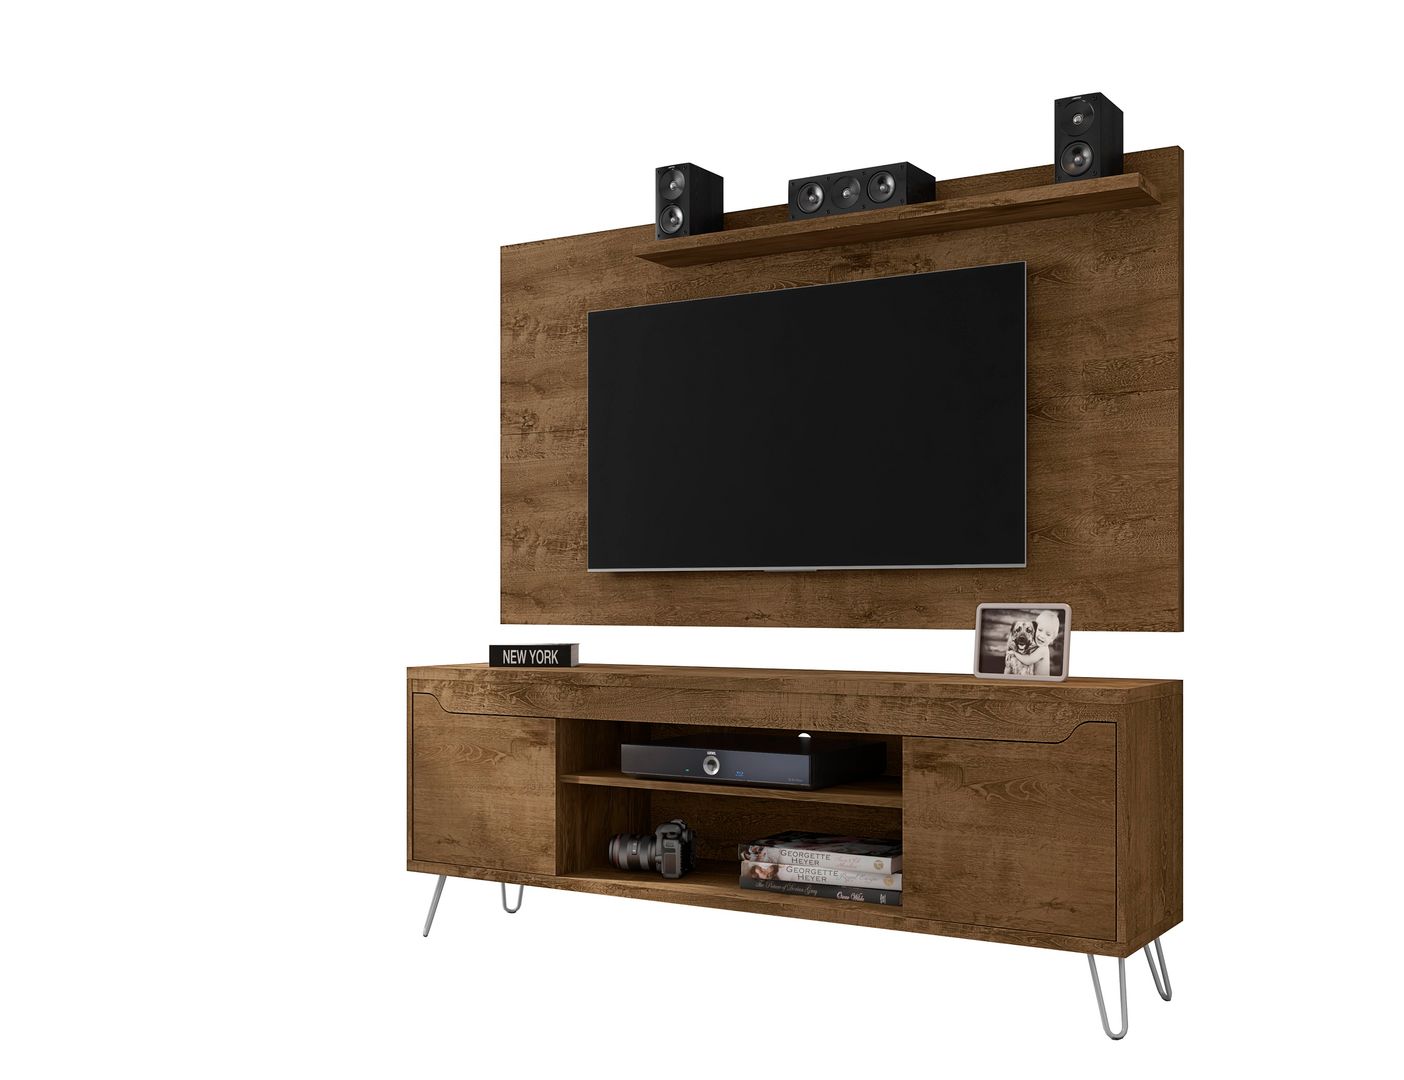 Manhattan Comfort Baxter 62.99 Mid-Century Modern TV Stand and Liberty Panel with Media and Display Shelves in Rustic BrownManhattan Comfort-Entertainment Center- - 1